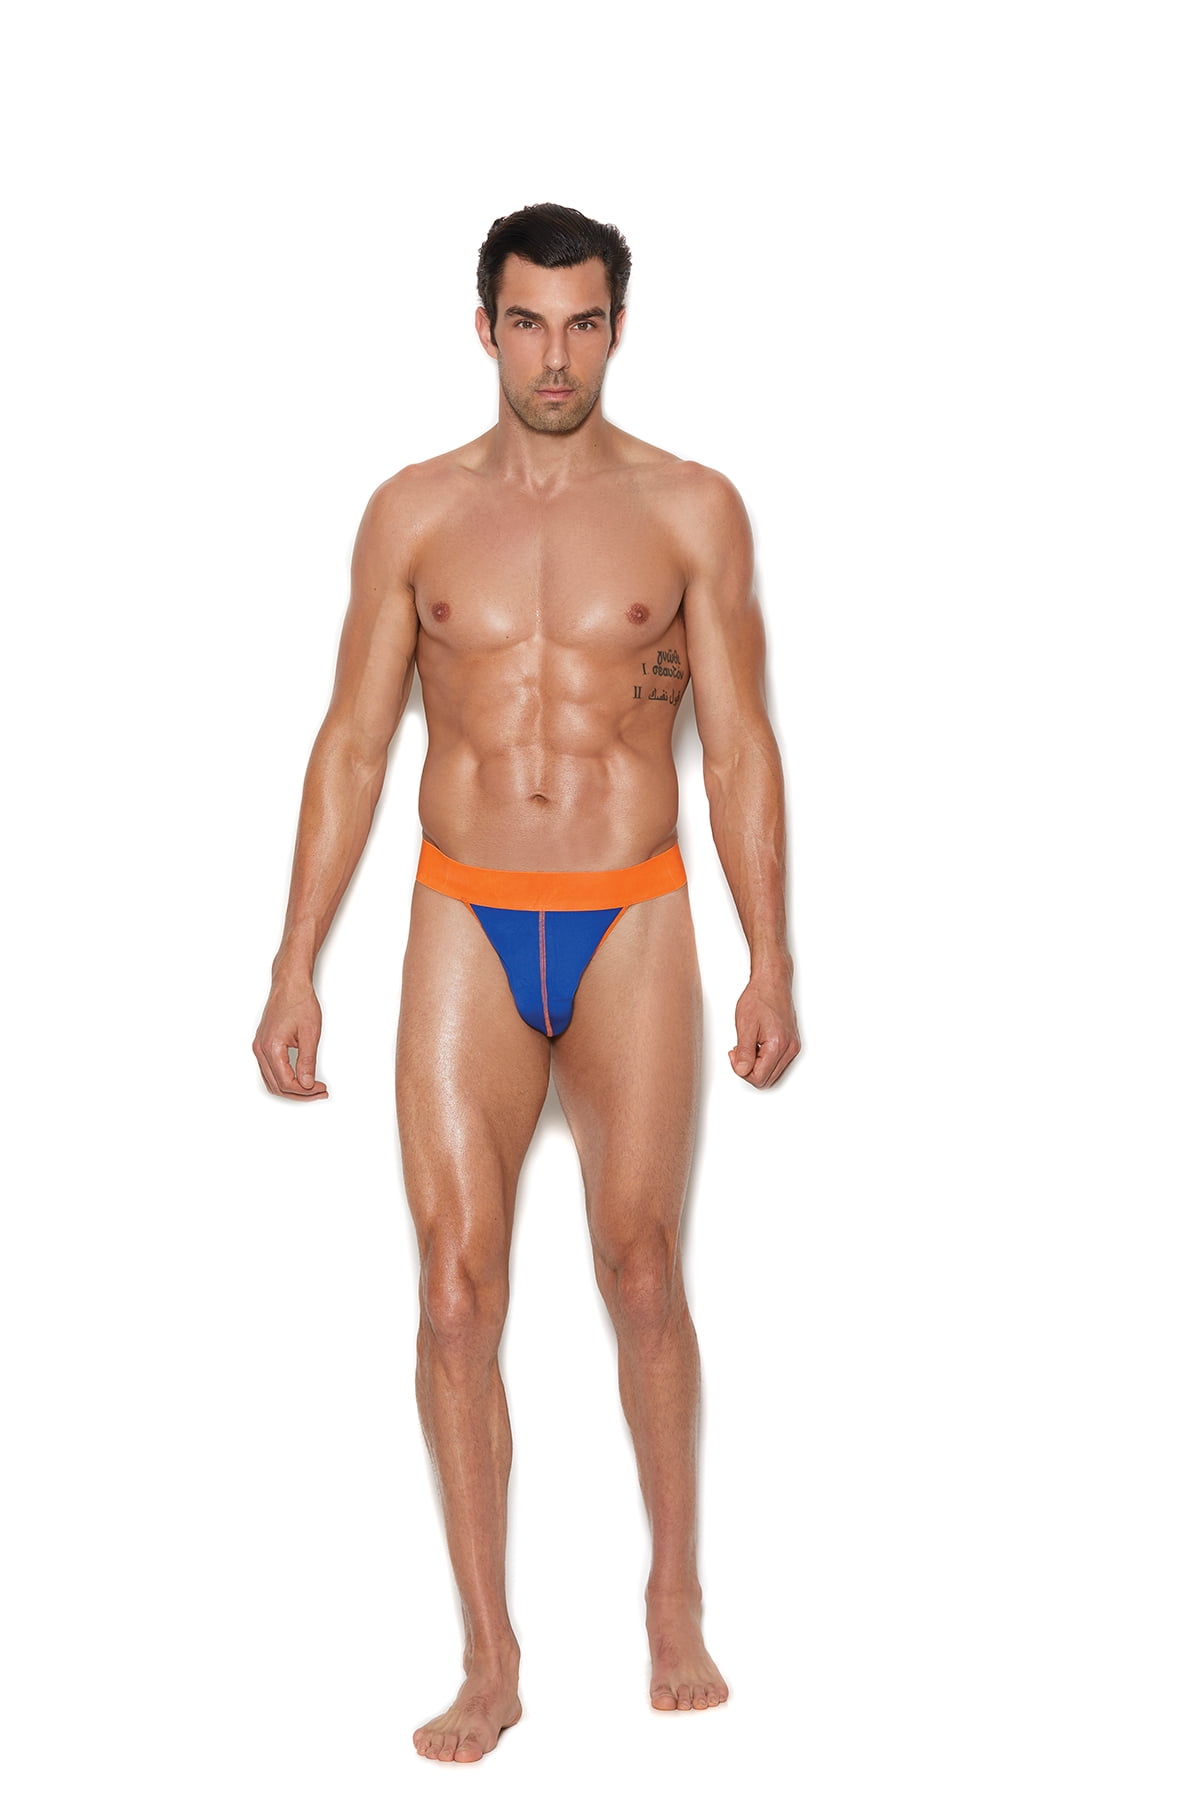 Men's thong with neon orange trim and elastic band